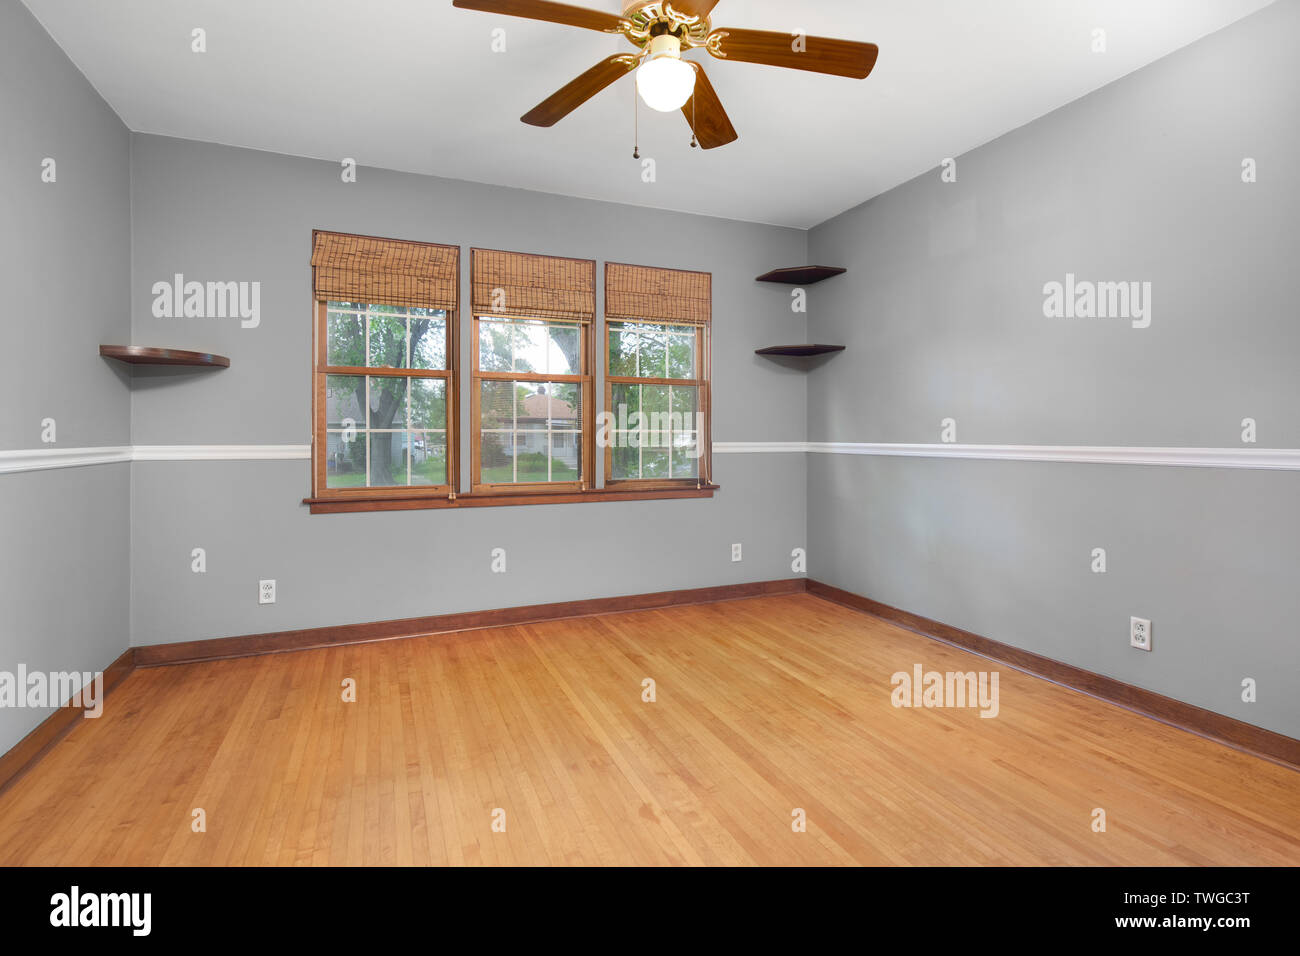 A plain grey room with with hardwood floors, ceiling fan and a view to a residential neighborhood. Stock Photo